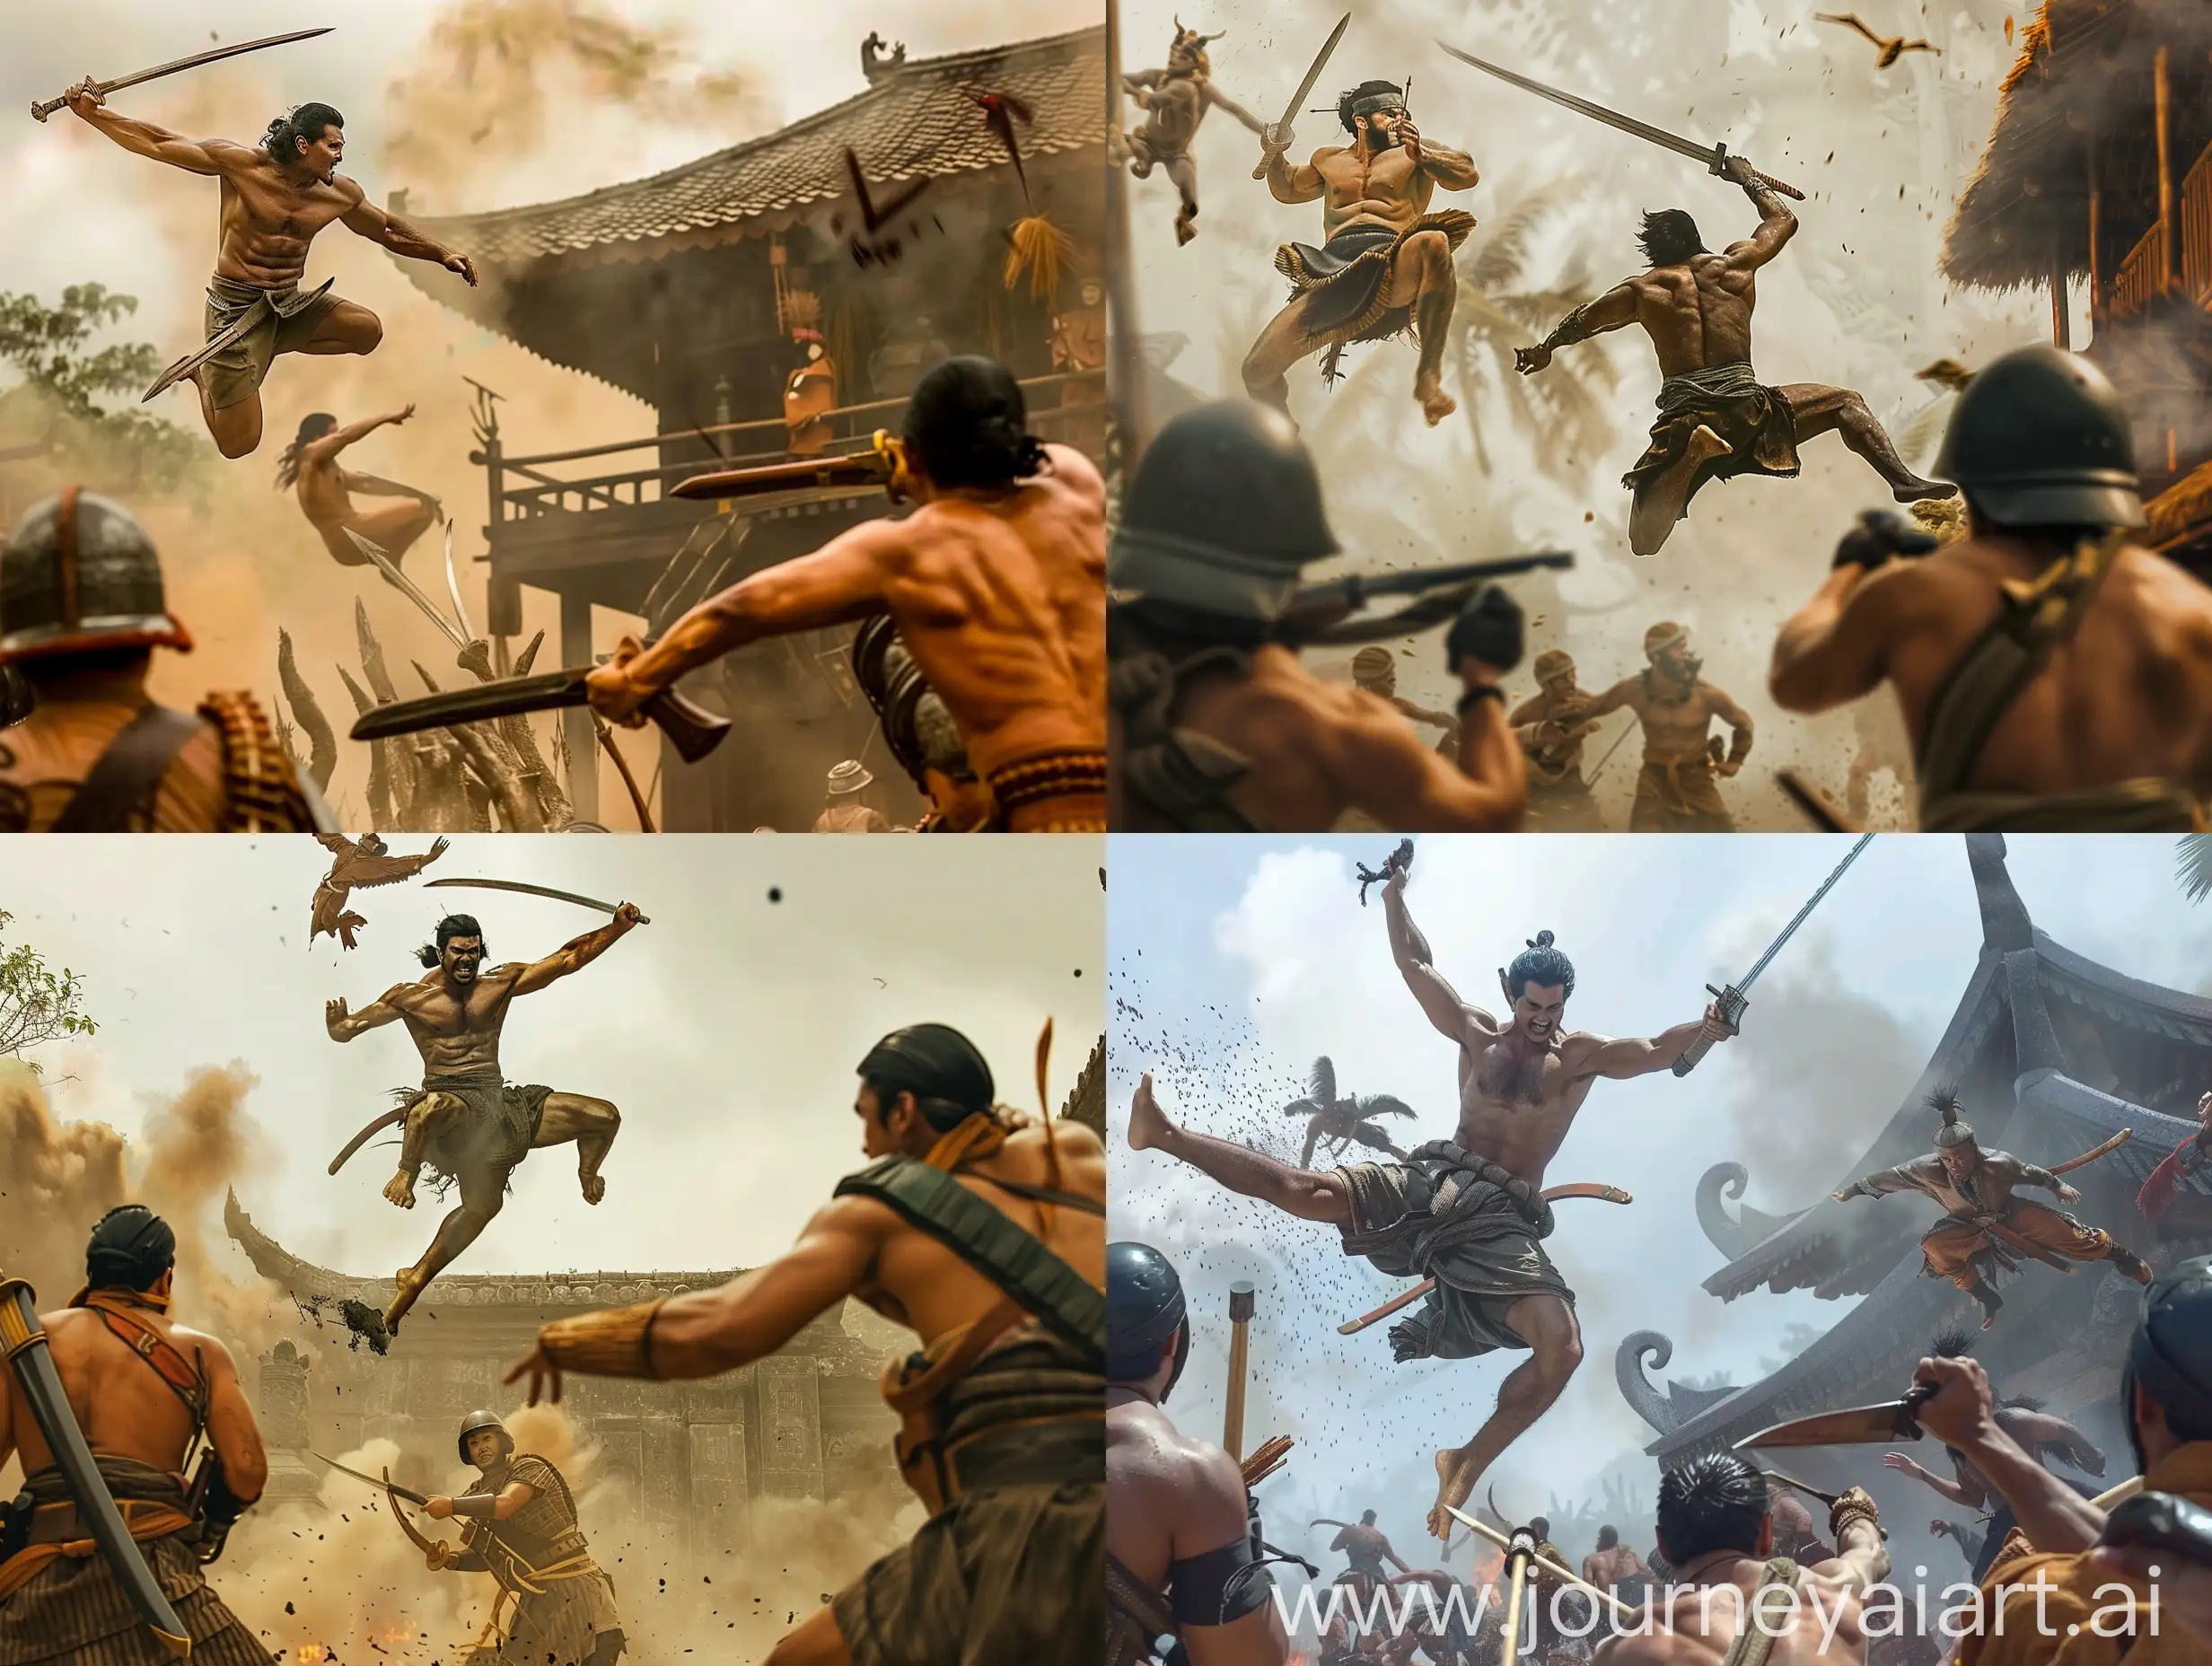 movie scene, in a battle in the Majapahit kingdom, a man jumps high holding a sword, and a soldier prepares to shoot him